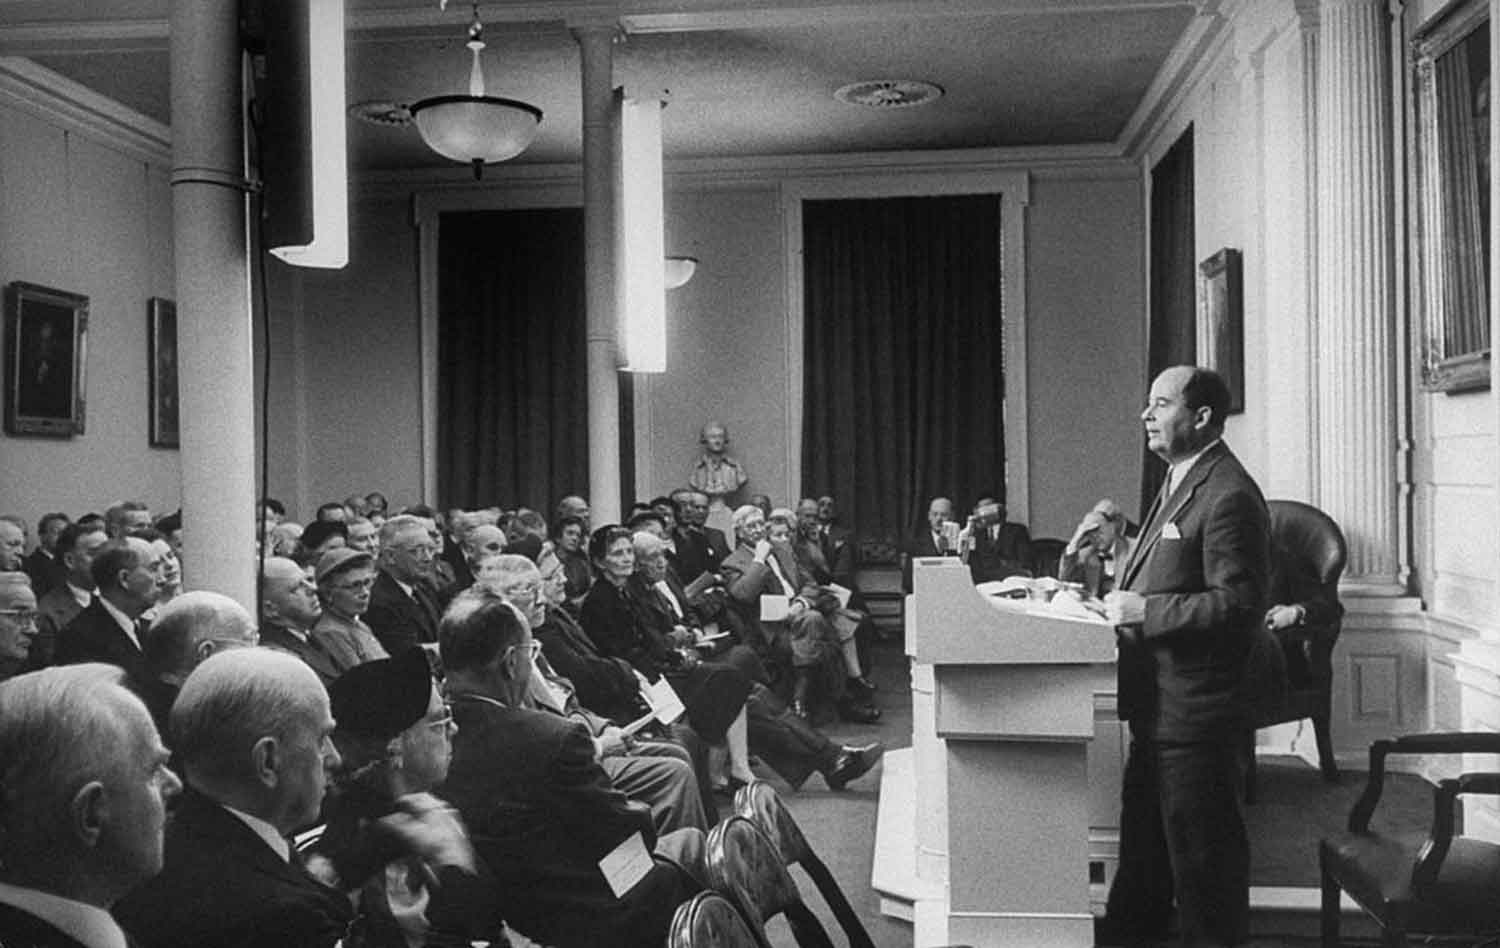 John von Neumann,
coauthor of Theory of
Games and Economic
Behavior, lectures at the
American Philosophical
Society in 1957.